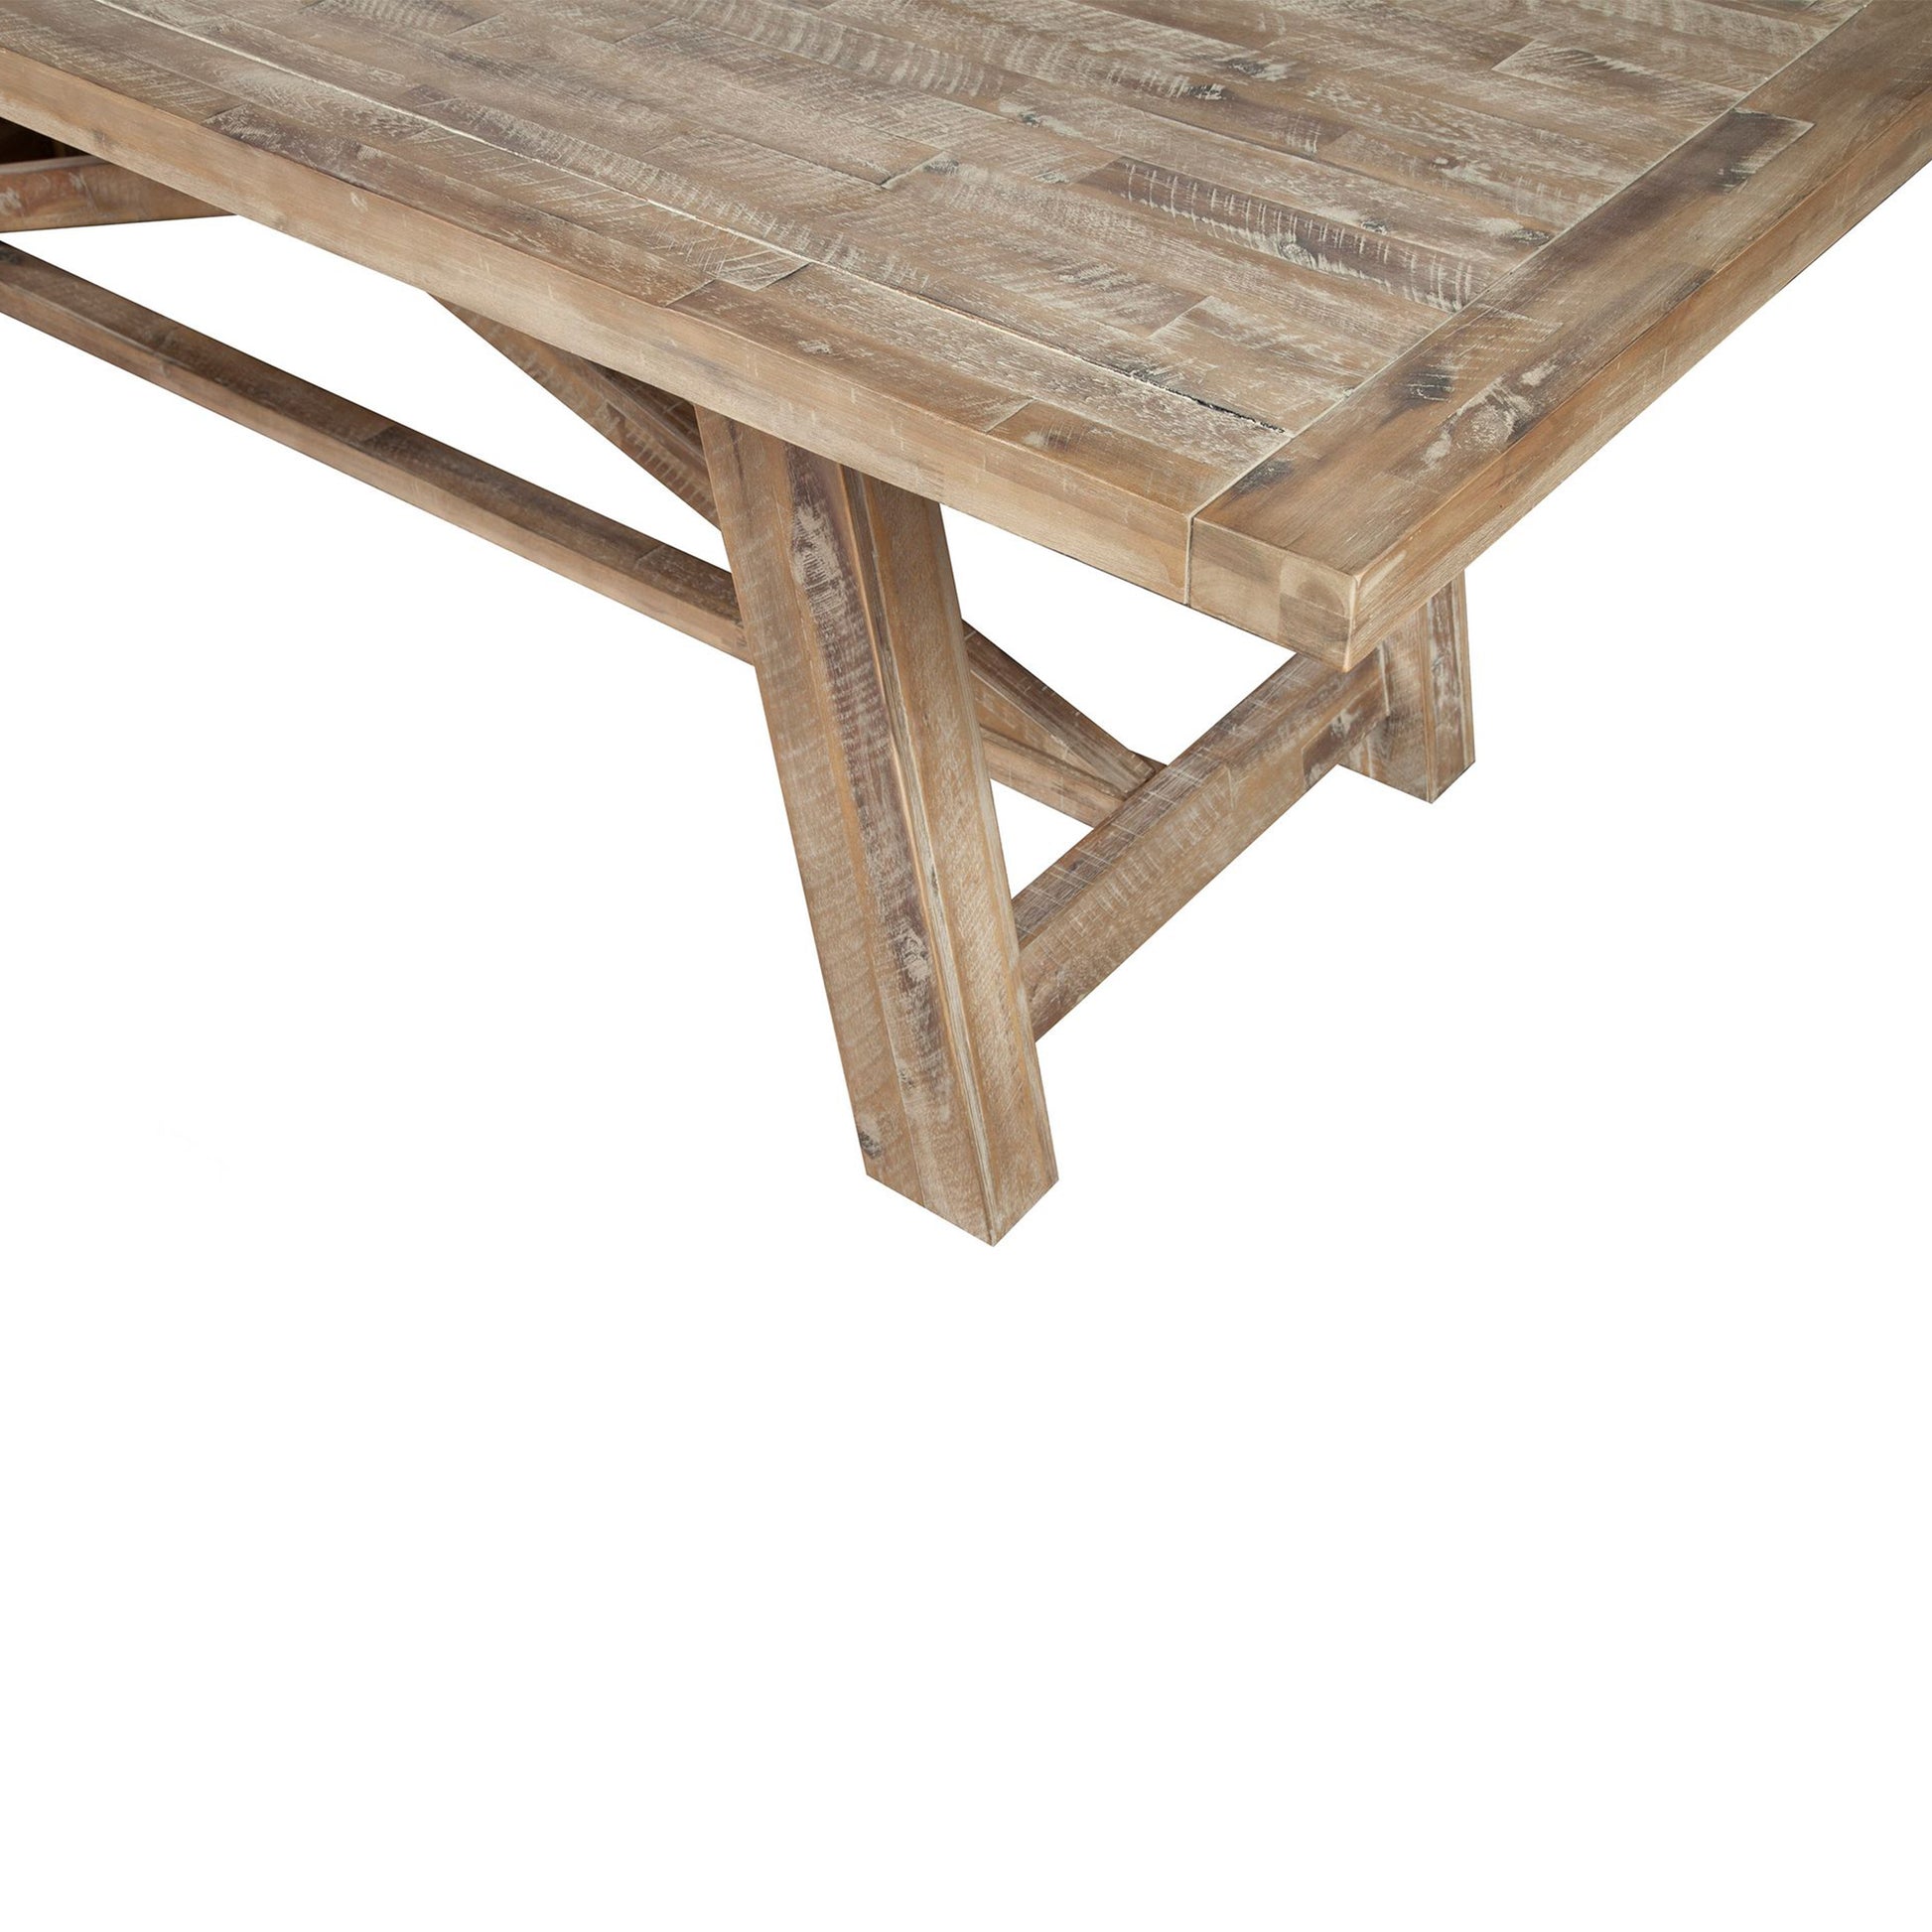 Newberry Acacia Table, Dining 8 Seater Stable Table, Contemporary Diner Table, Rectangular, Acacia Solids, 2068-01; Brand: Alpine Furniture Size: 83inW x  39.5inD x  30inH; Extended: 103inW x  39.5inD x  30inH Weight: 175lb; Shape: Rectangular; Material: Acacia Solids Seating Capacity: Seats 6-8 people; Color: Weathered natural